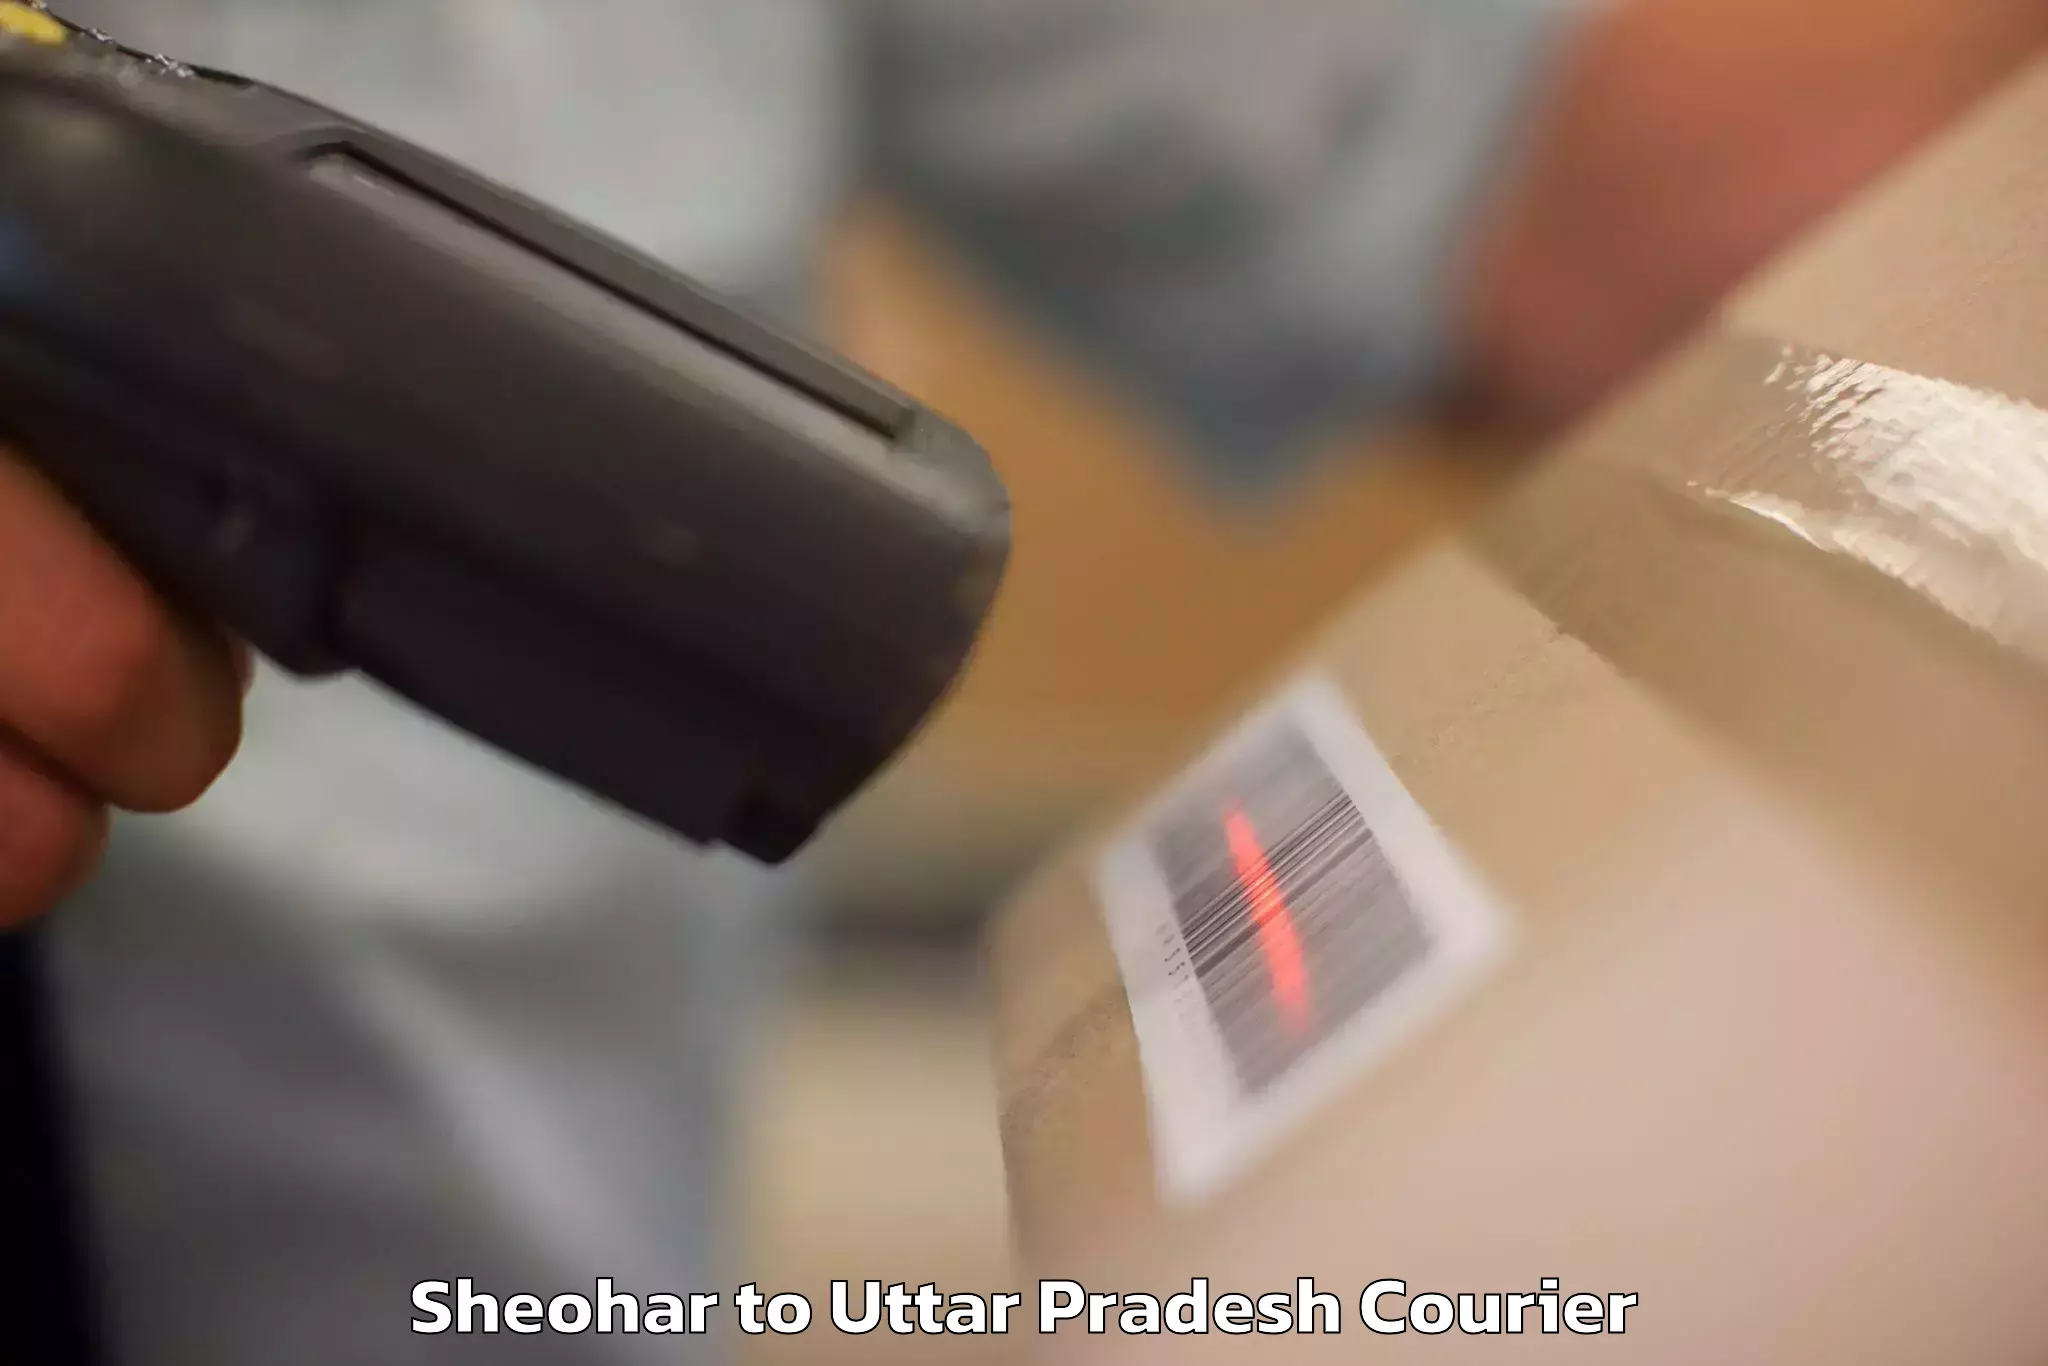 Baggage shipping service Sheohar to Aligarh